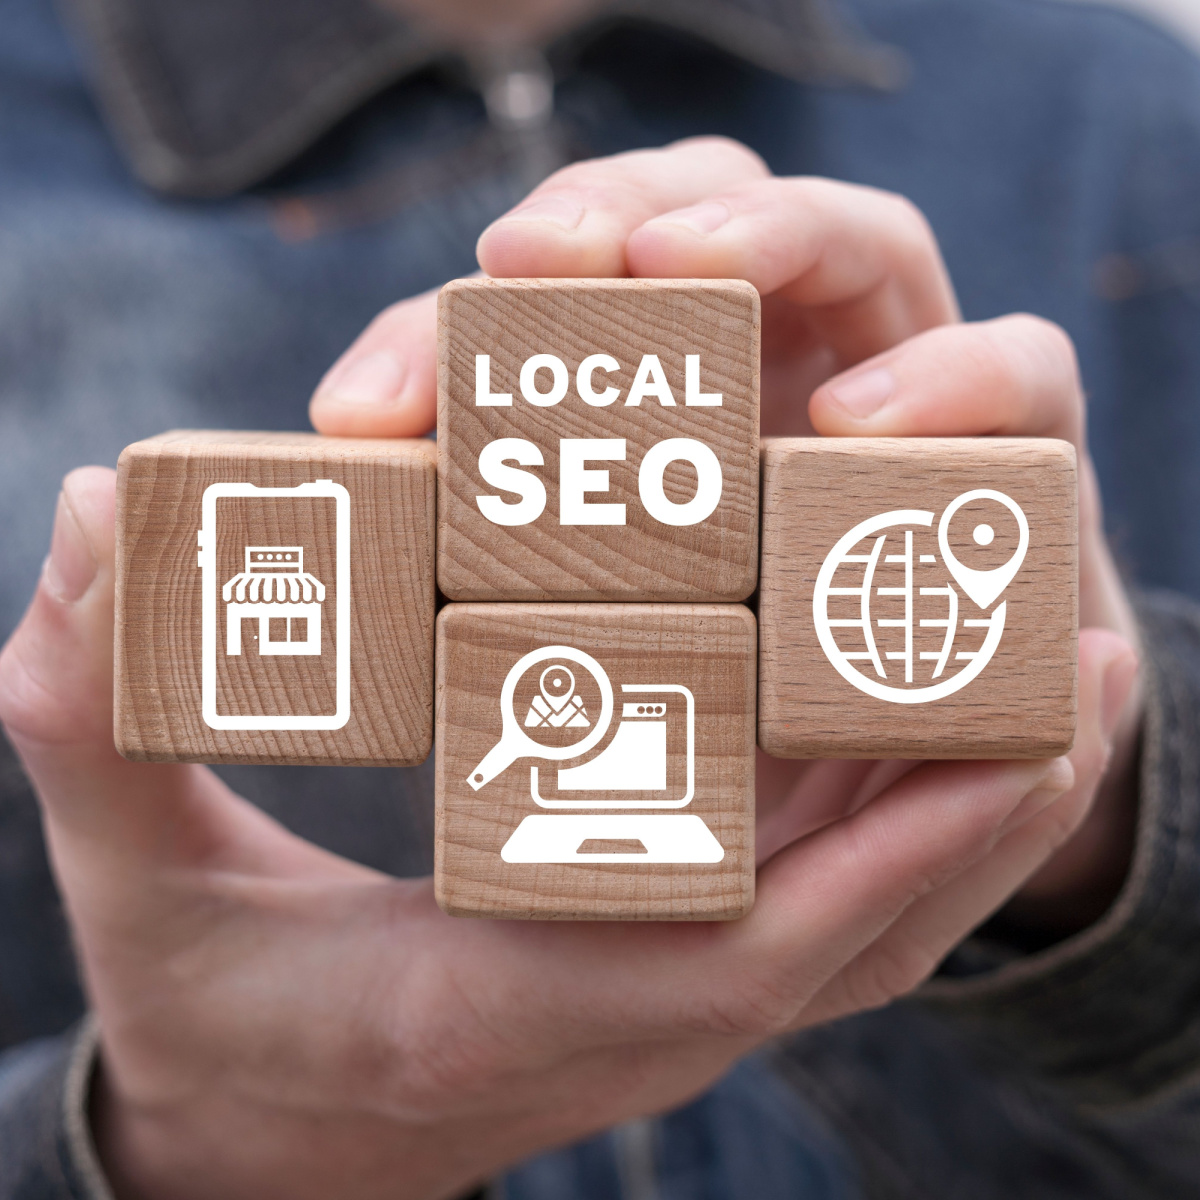 Local SEO is an important block in your Houston digital marketing strategy.